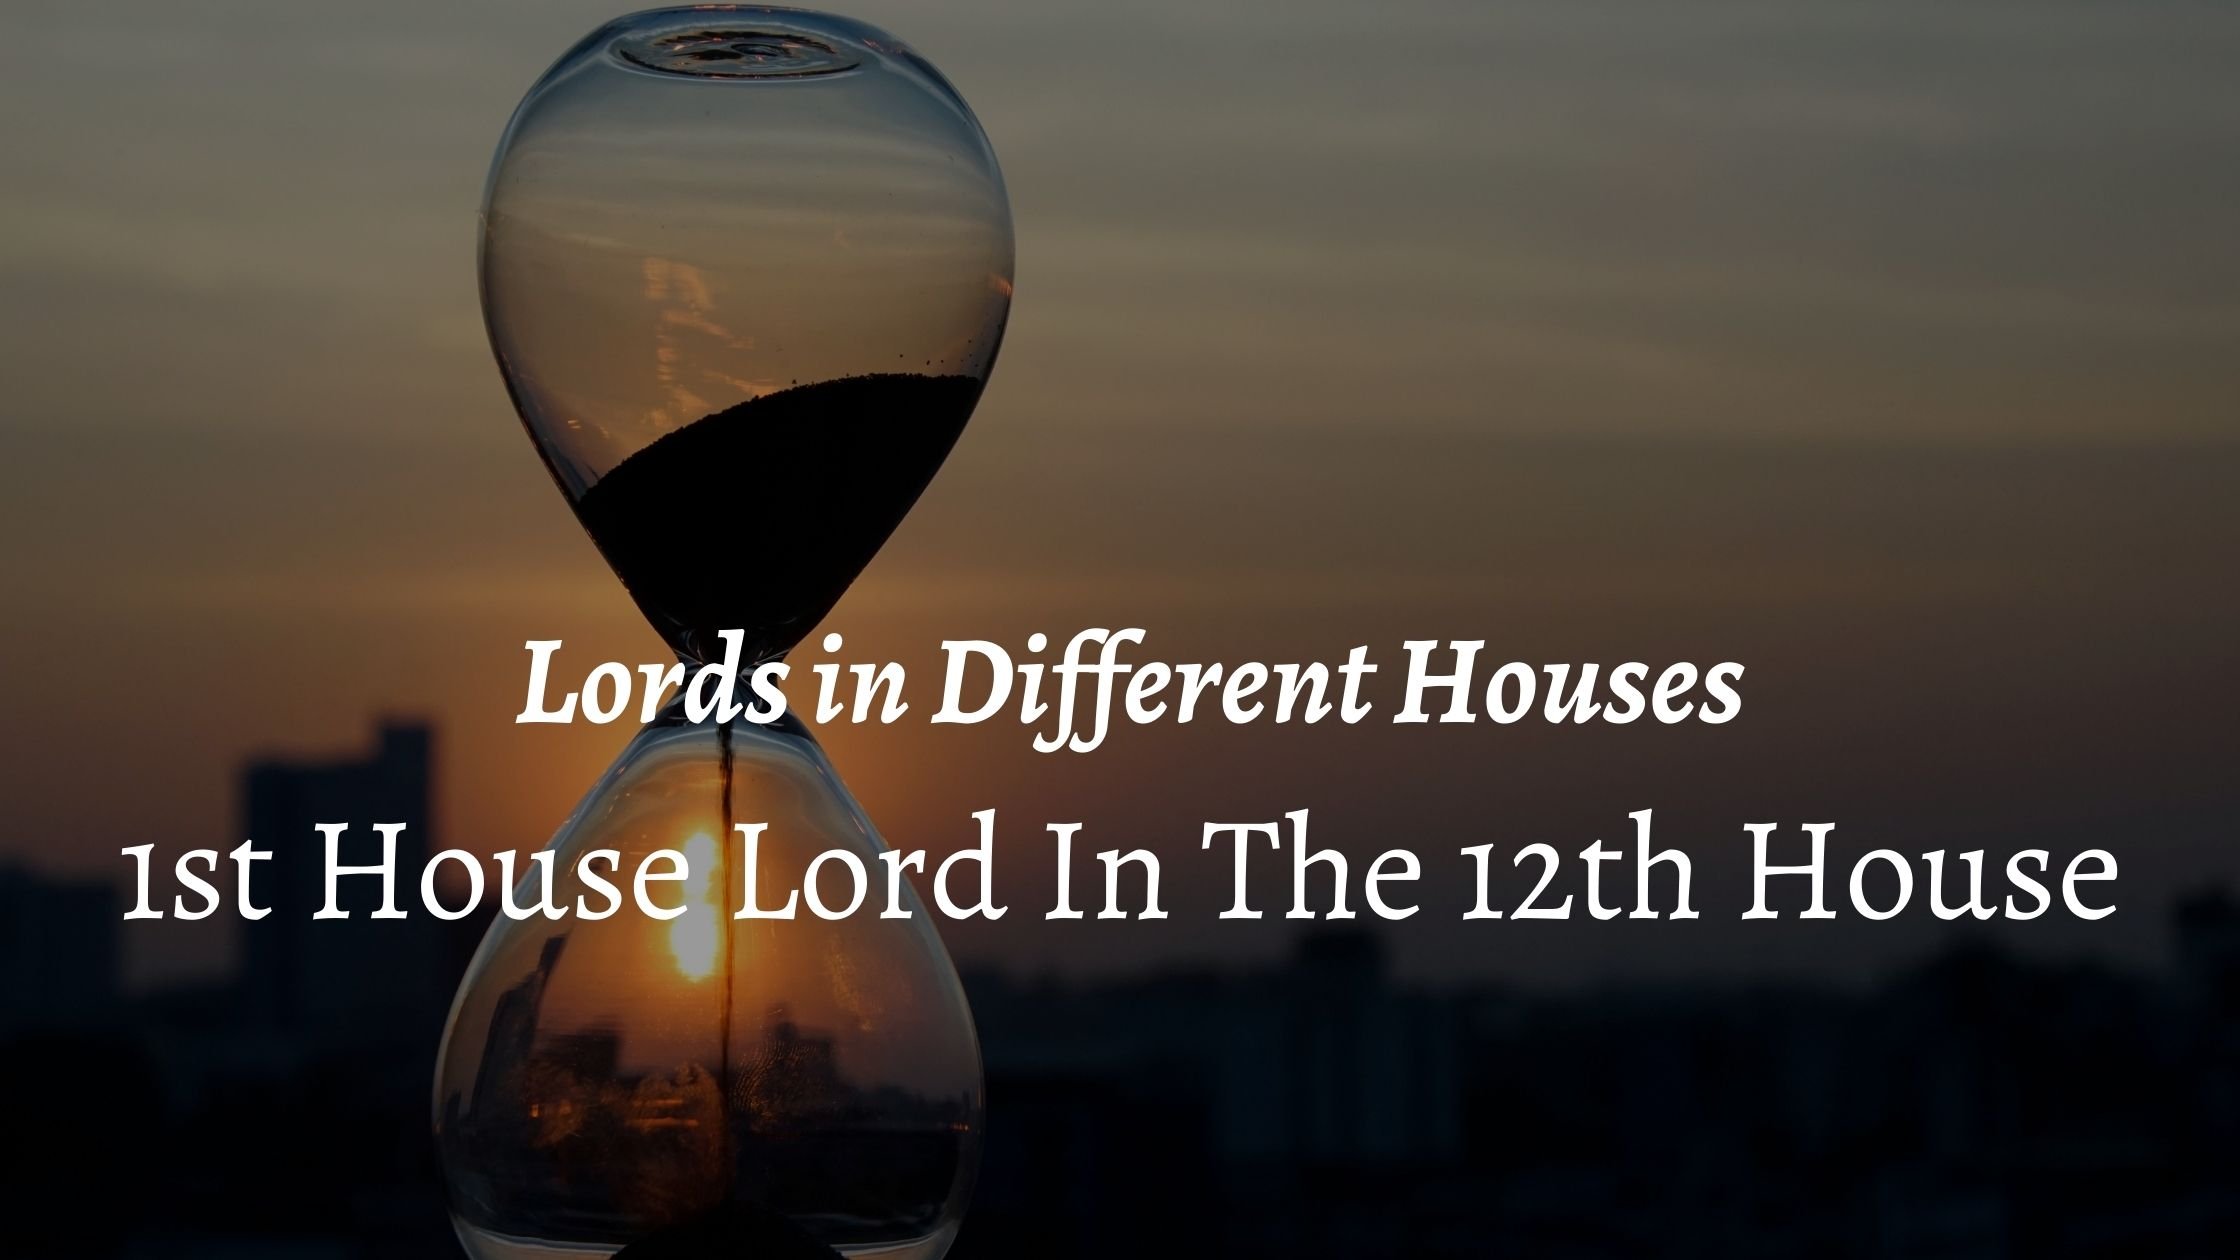 1st house lord in the 12th house